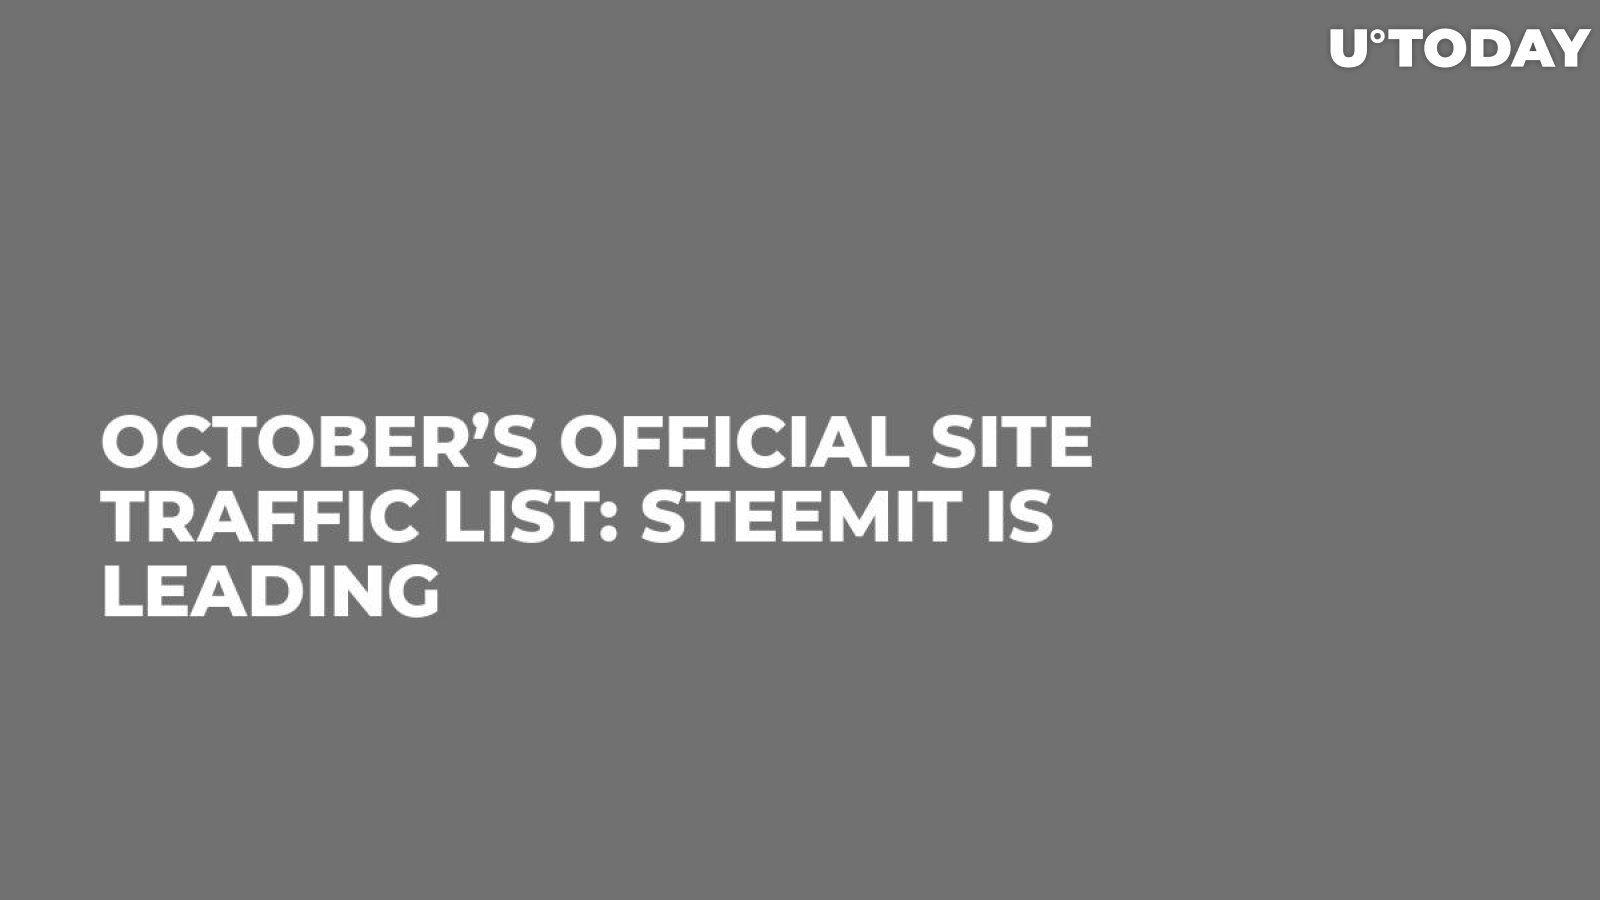 October’s Official Site Traffic List: Steemit is Leading